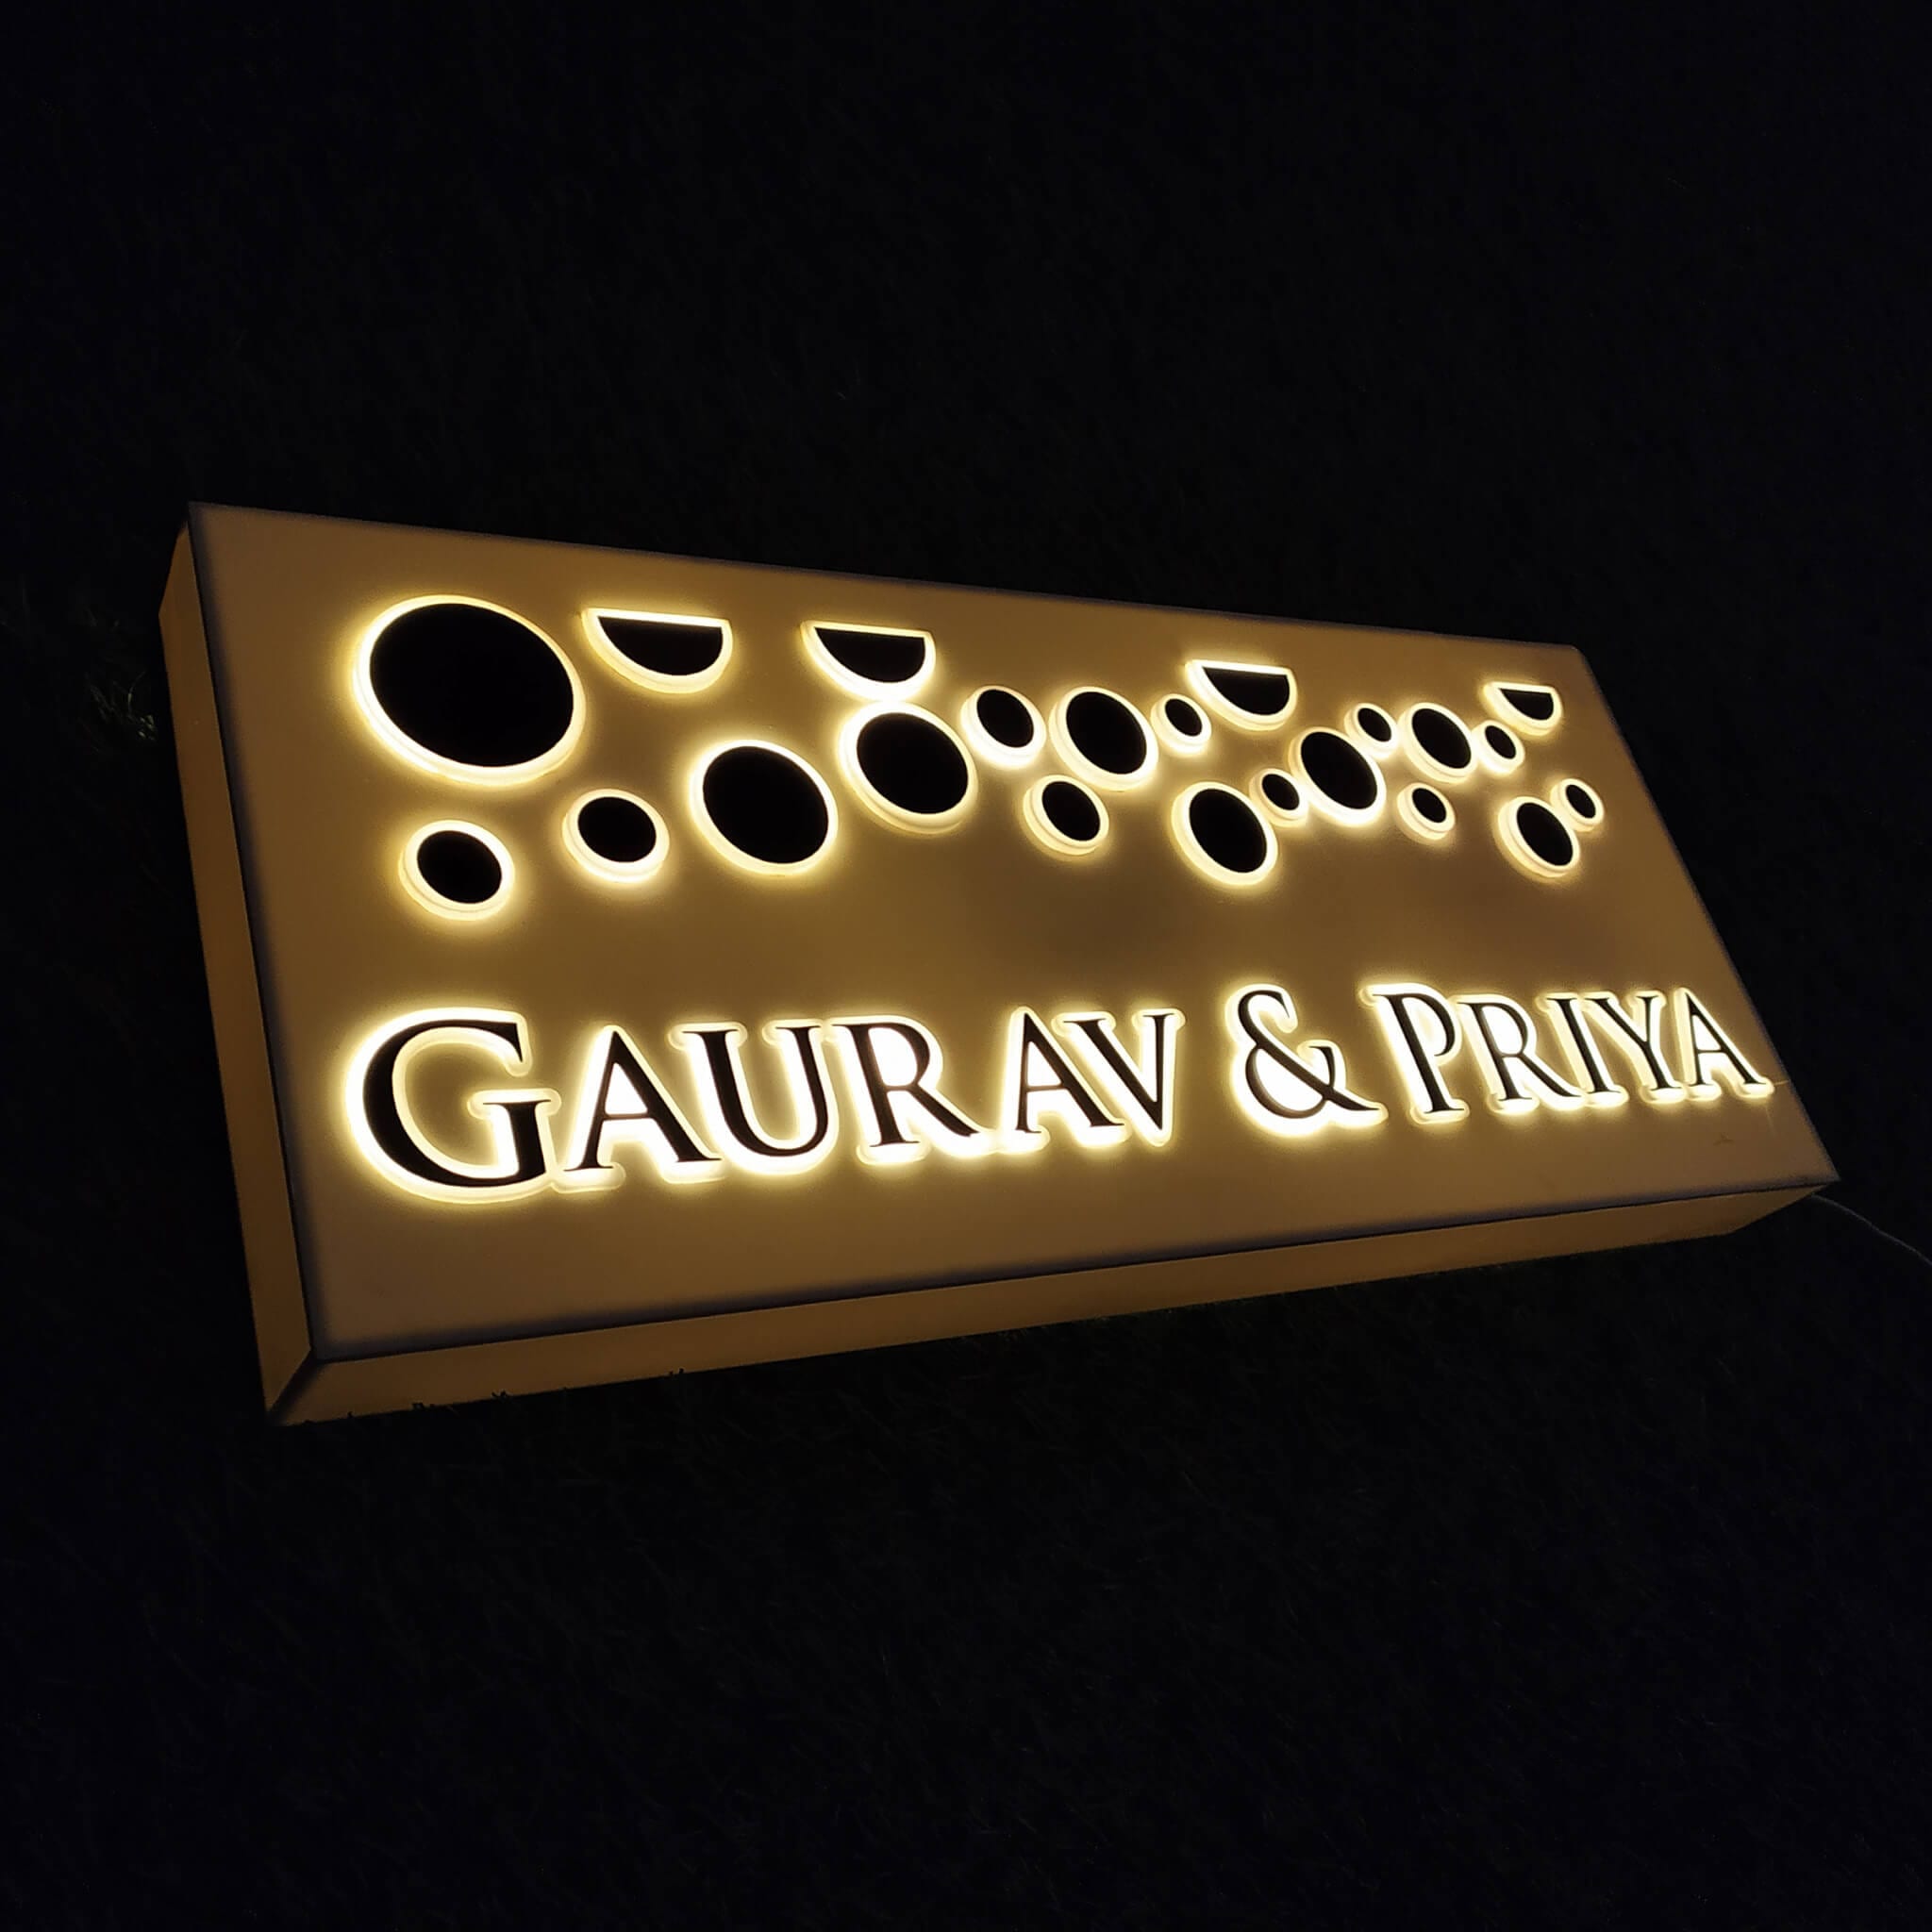 Edge-lit Planets of Gold – Arcylic name plate